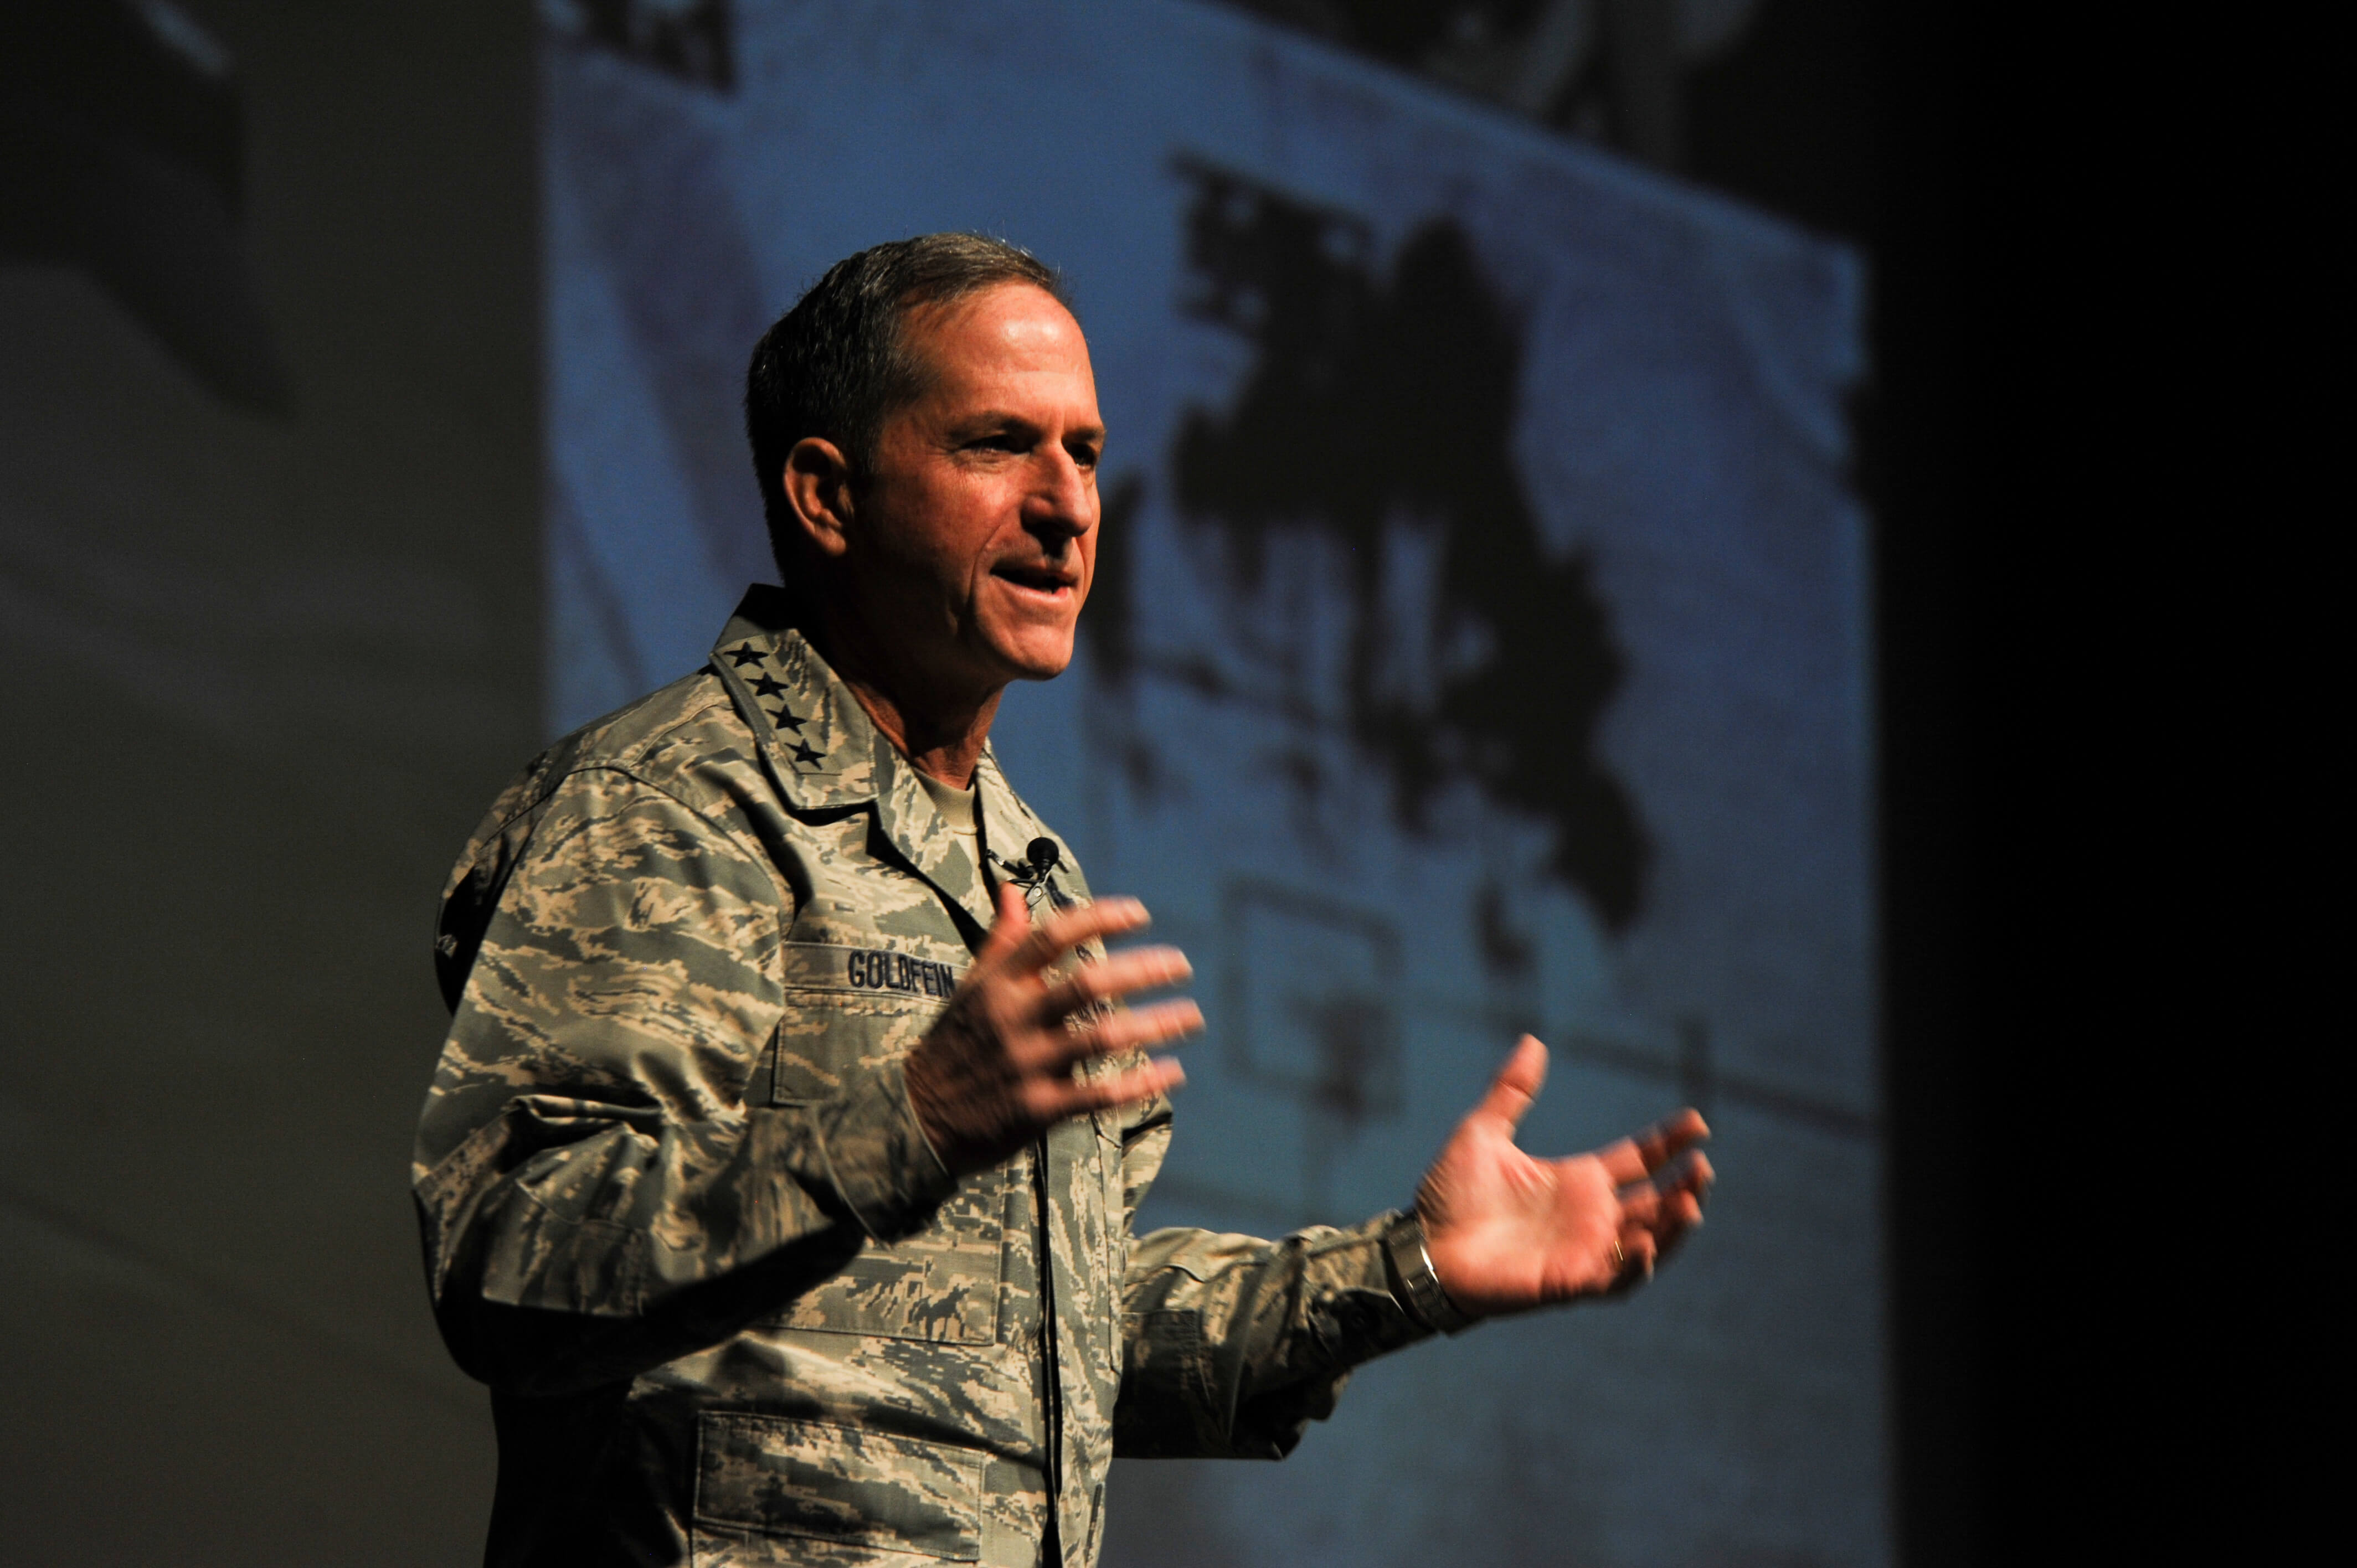 Air Force Chief of Staff Gen. David L. Goldfein talks about his experiences in the Air Force